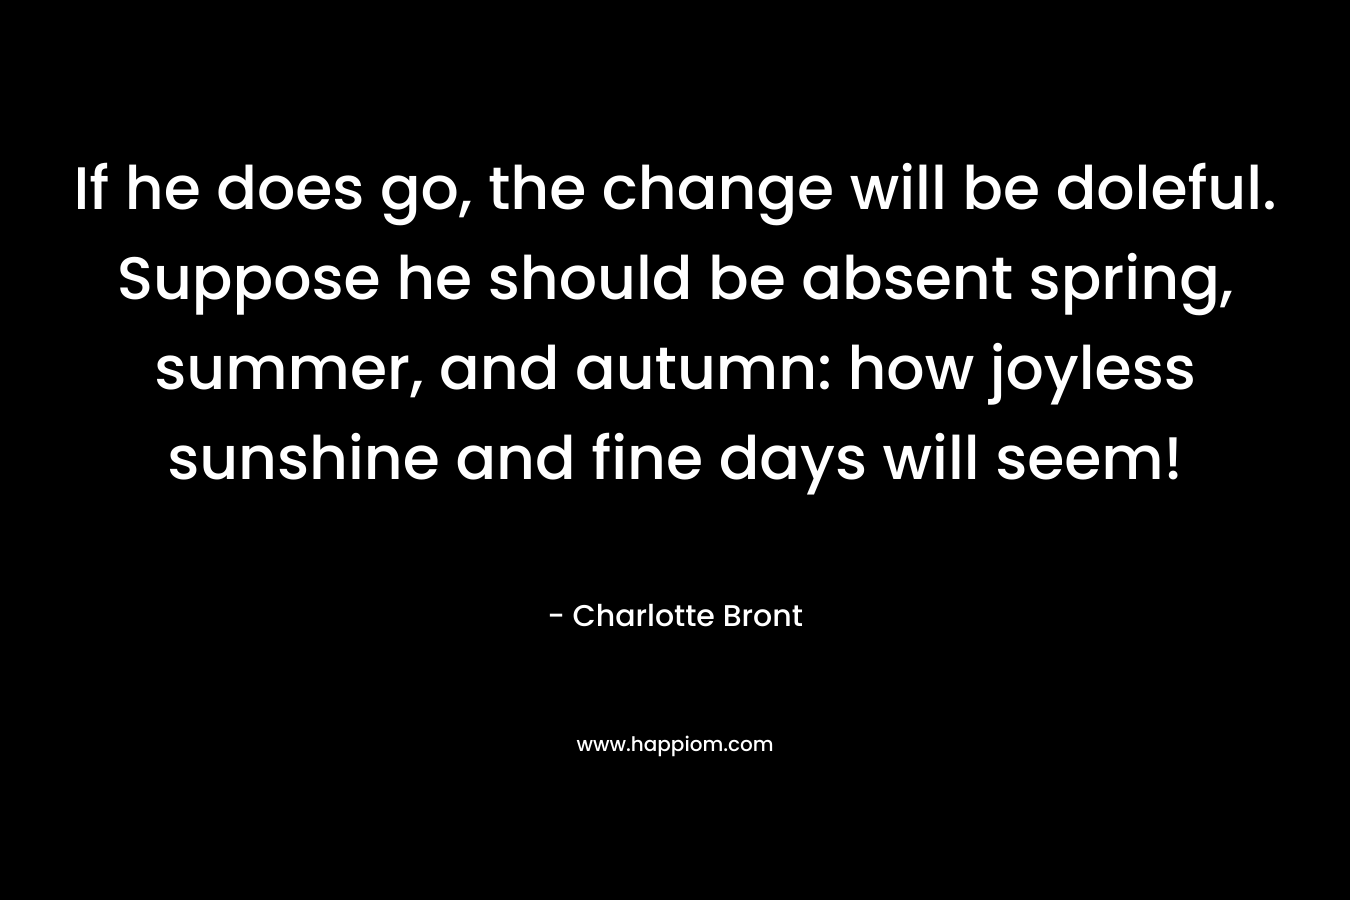 If he does go, the change will be doleful. Suppose he should be absent spring, summer, and autumn: how joyless sunshine and fine days will seem!